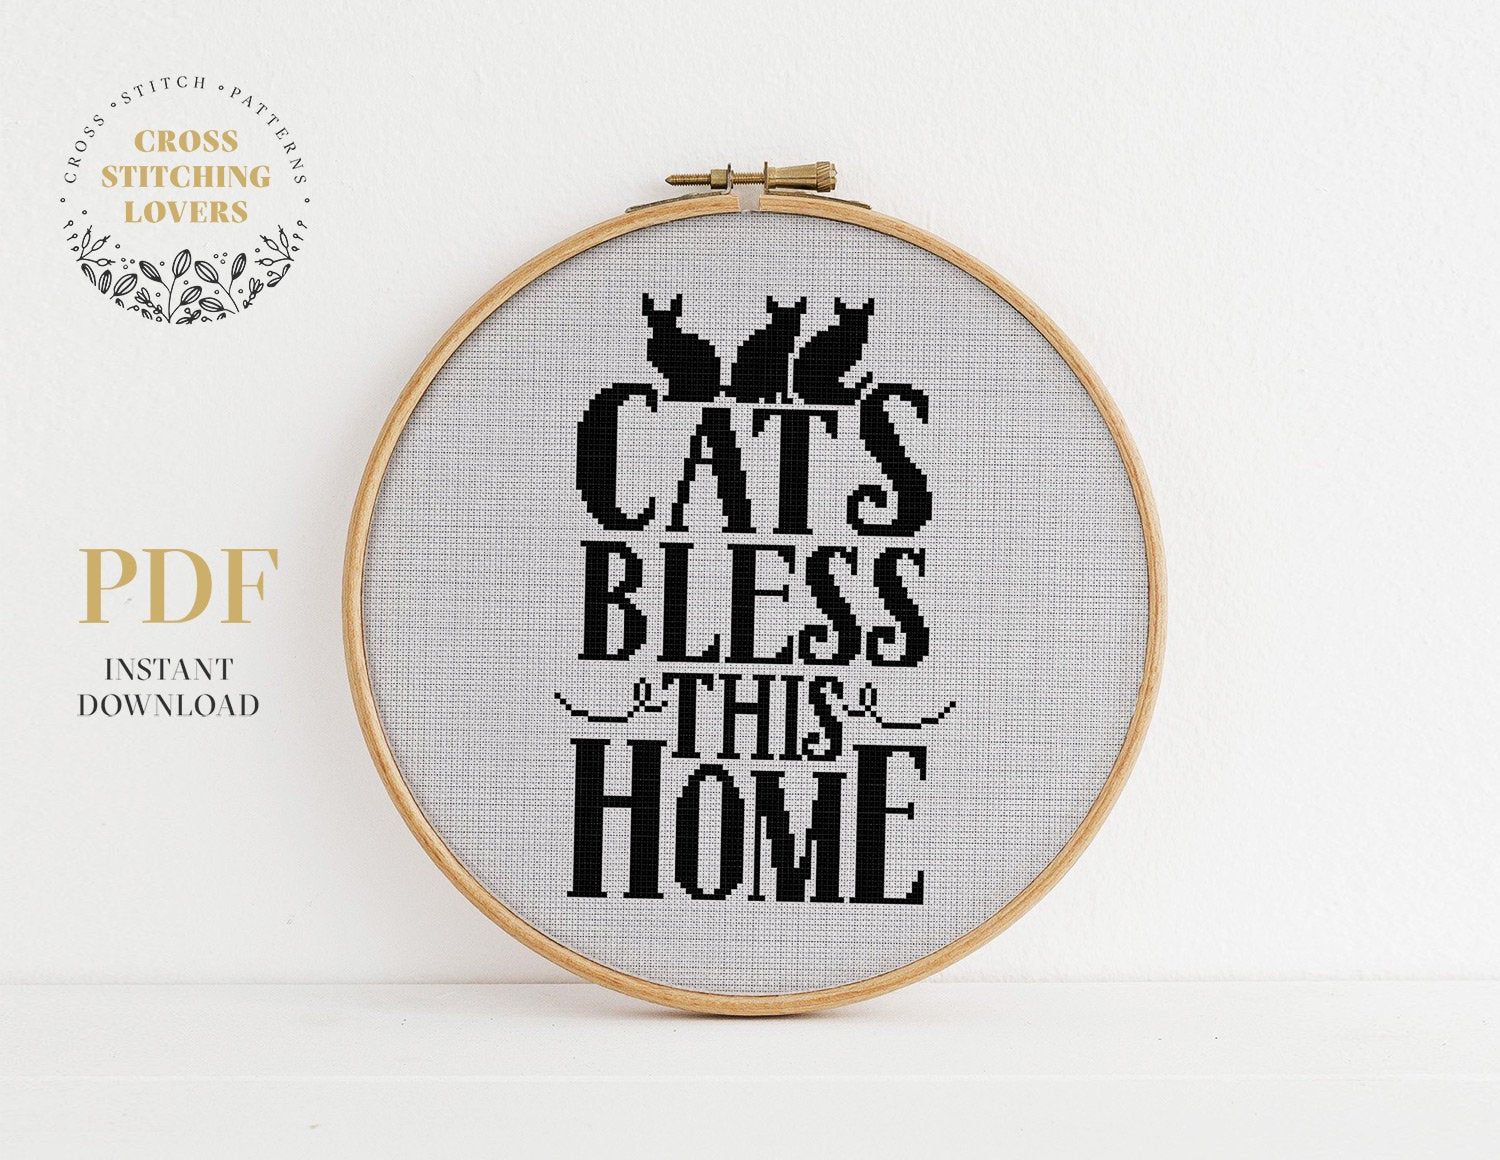 Cats Bless This Home - Cross stitch pattern